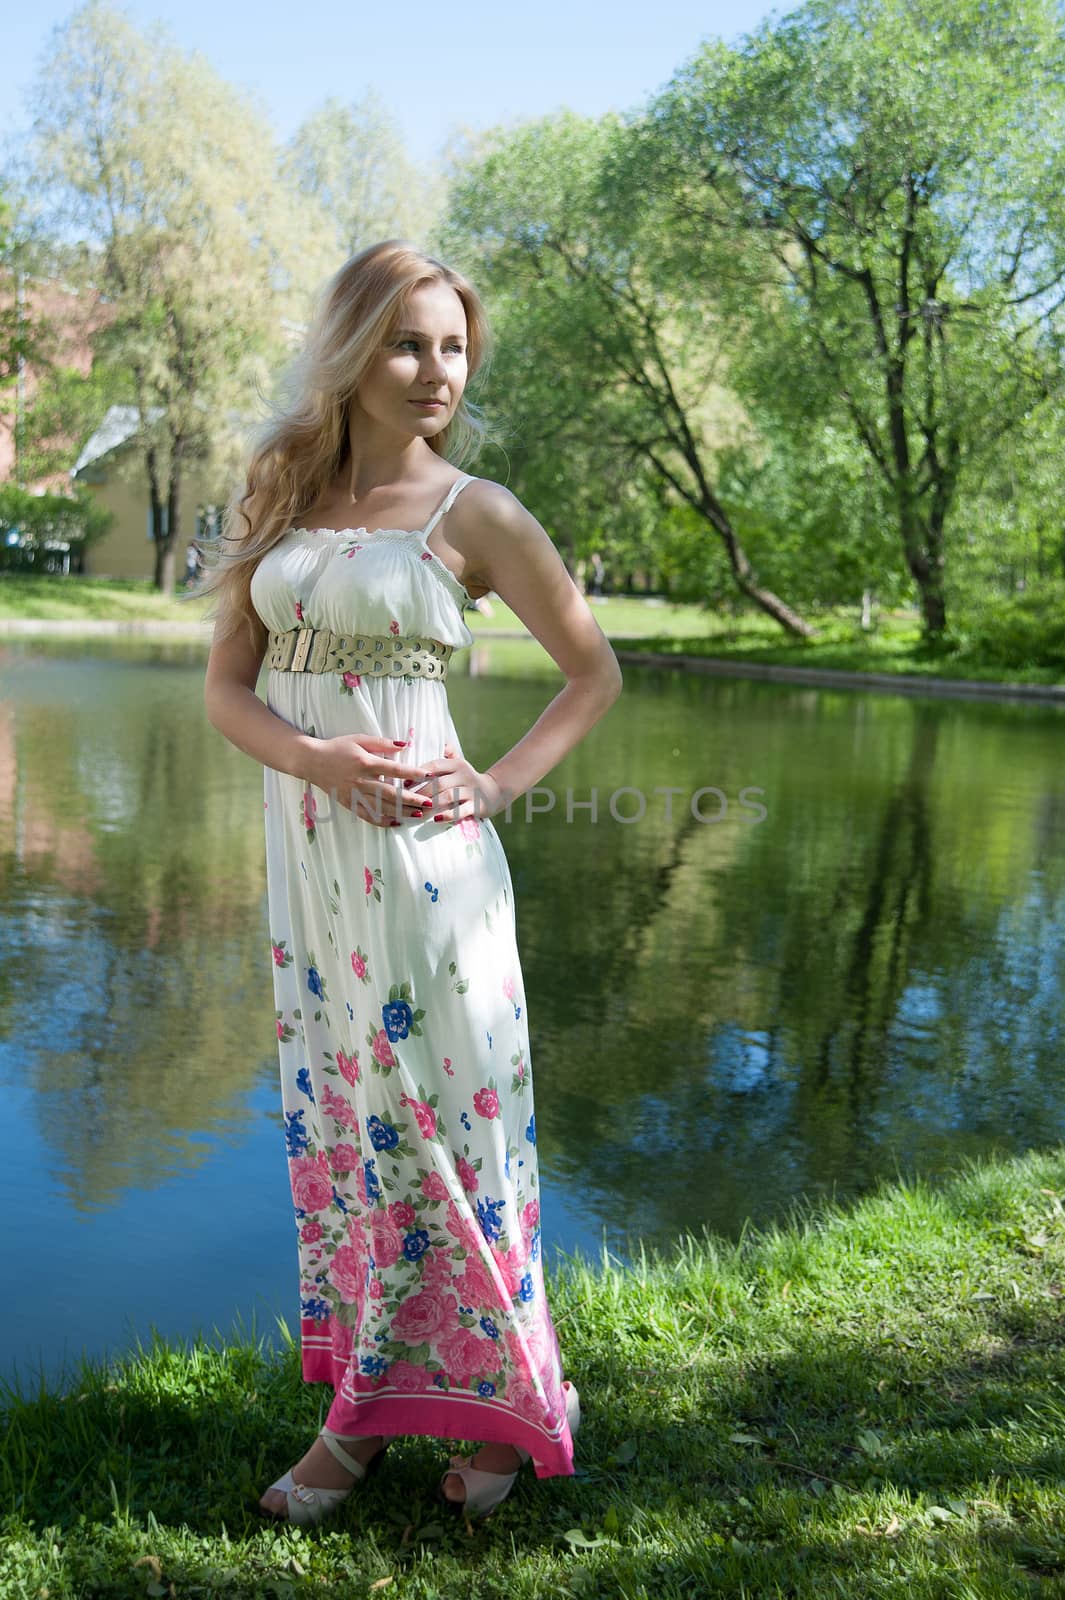 beautiful blonde near the water in the summer park